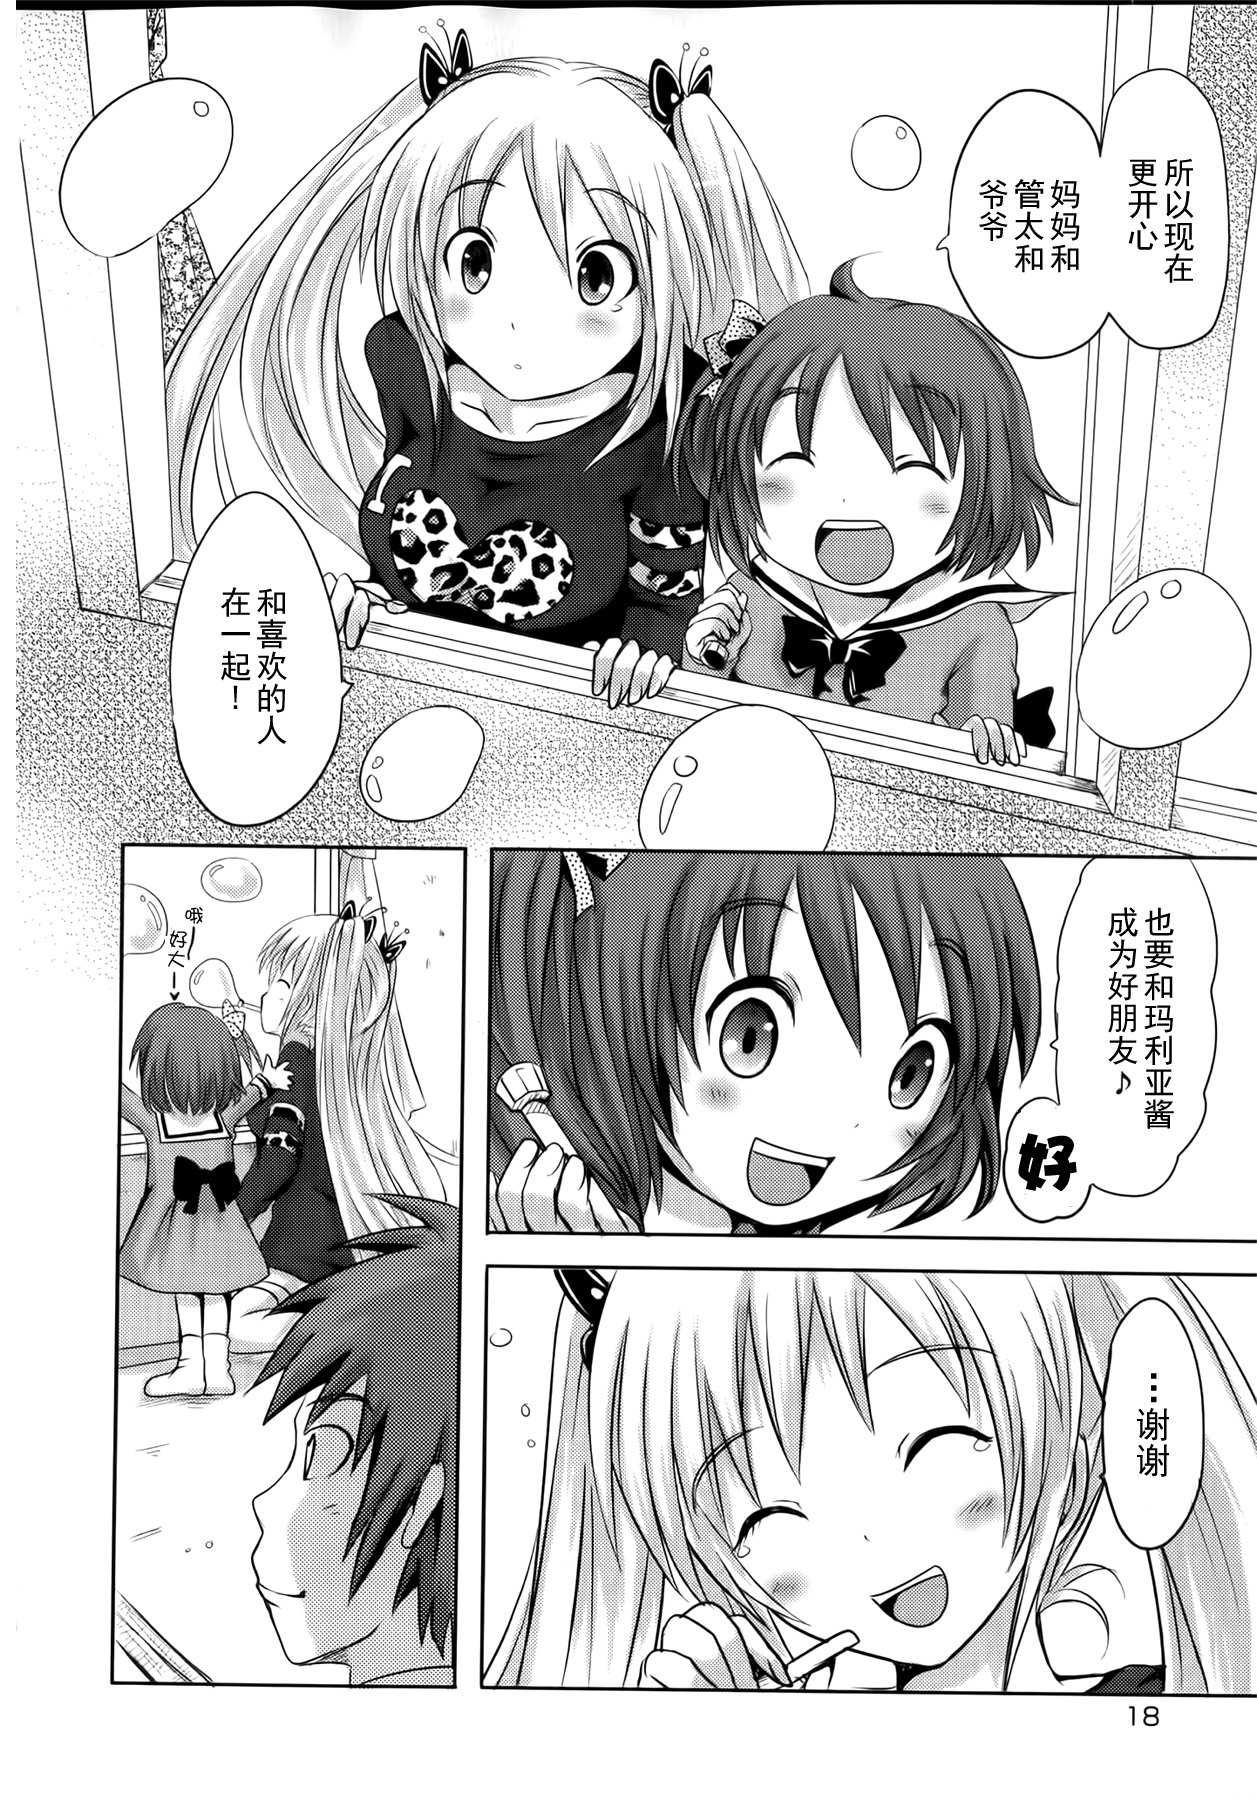 [Natsume Fumika] Sundere! Ch.10 [Chinese] [夏目文花] スンデレ! CH10 [中文翻譯]